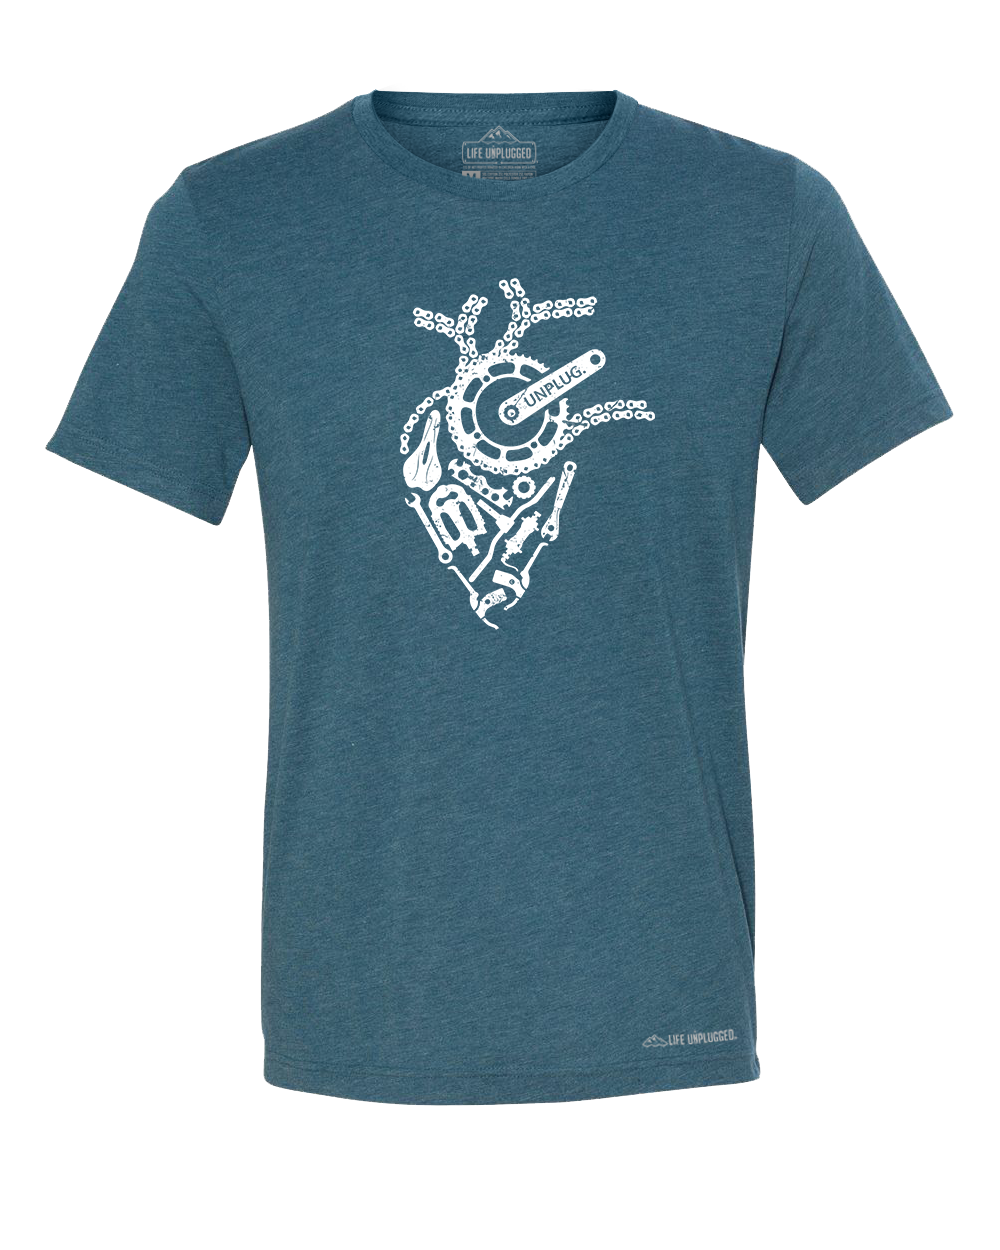 Anatomical Heart (Bicycle Parts) Premium Triblend T-Shirt - Life Unplugged